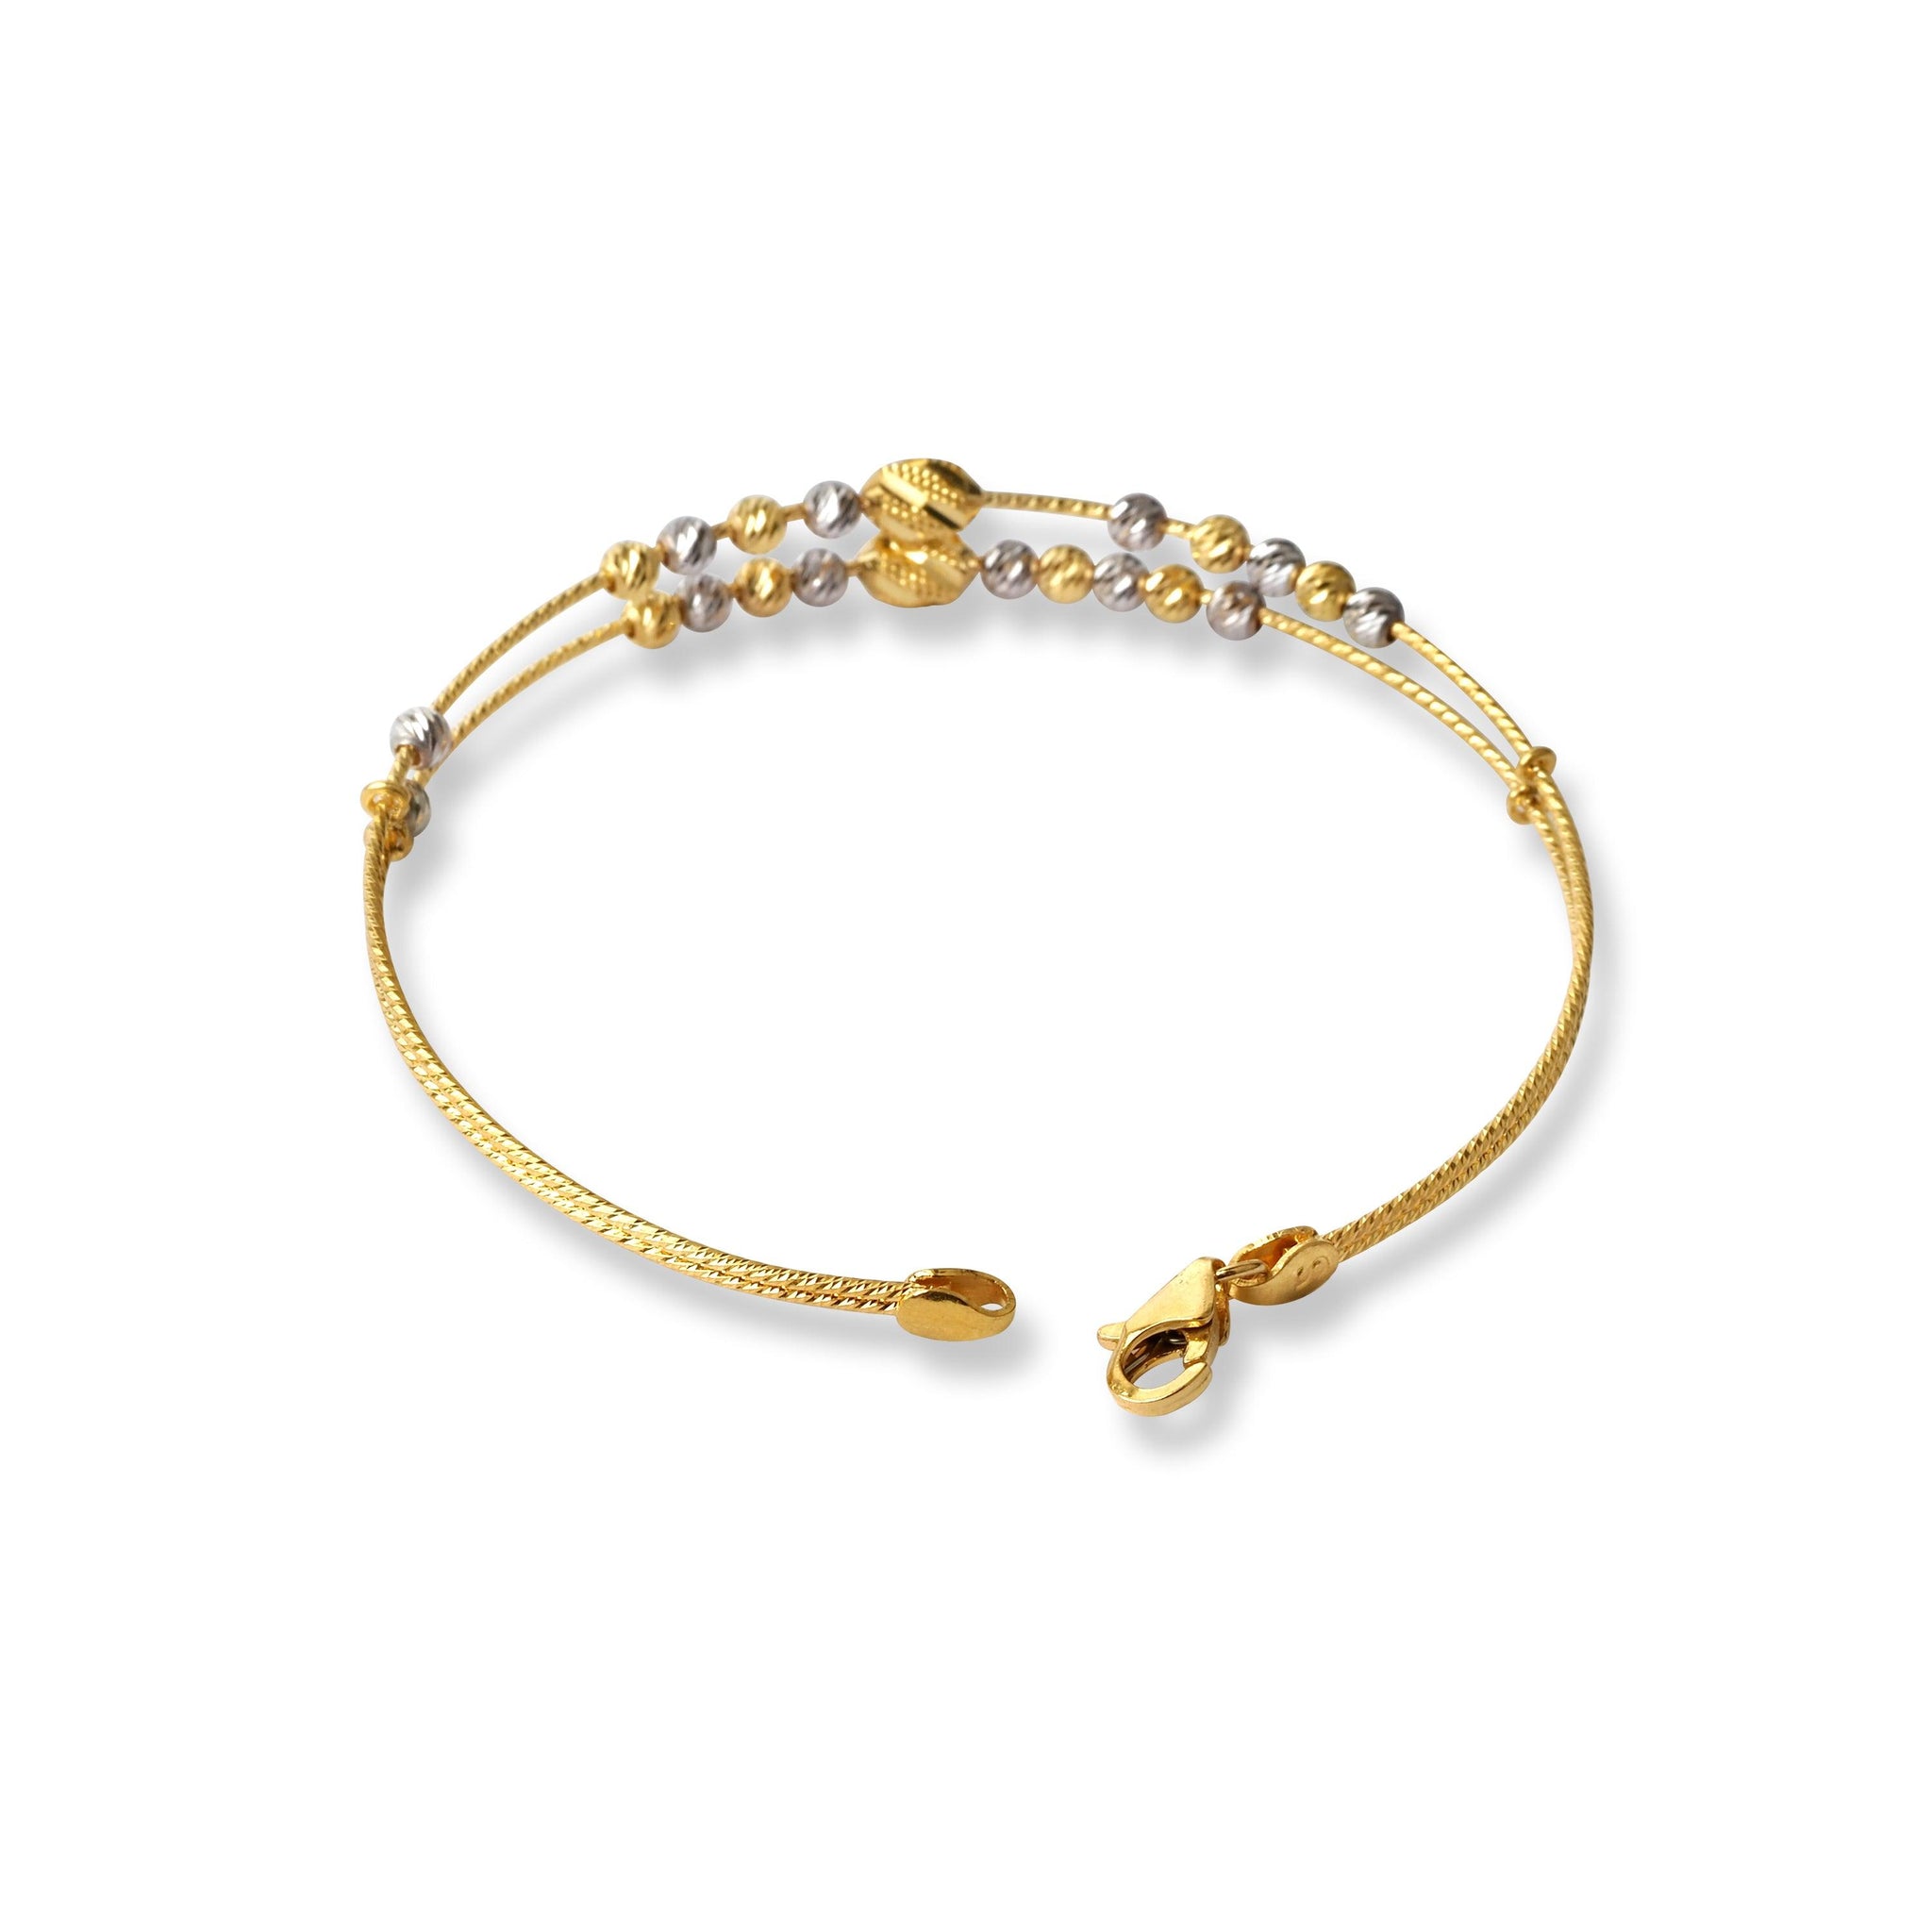 22ct Gold Rhodium Plated Beads Bangle With Rounded Trigger Clasp (6.96g) B-8503